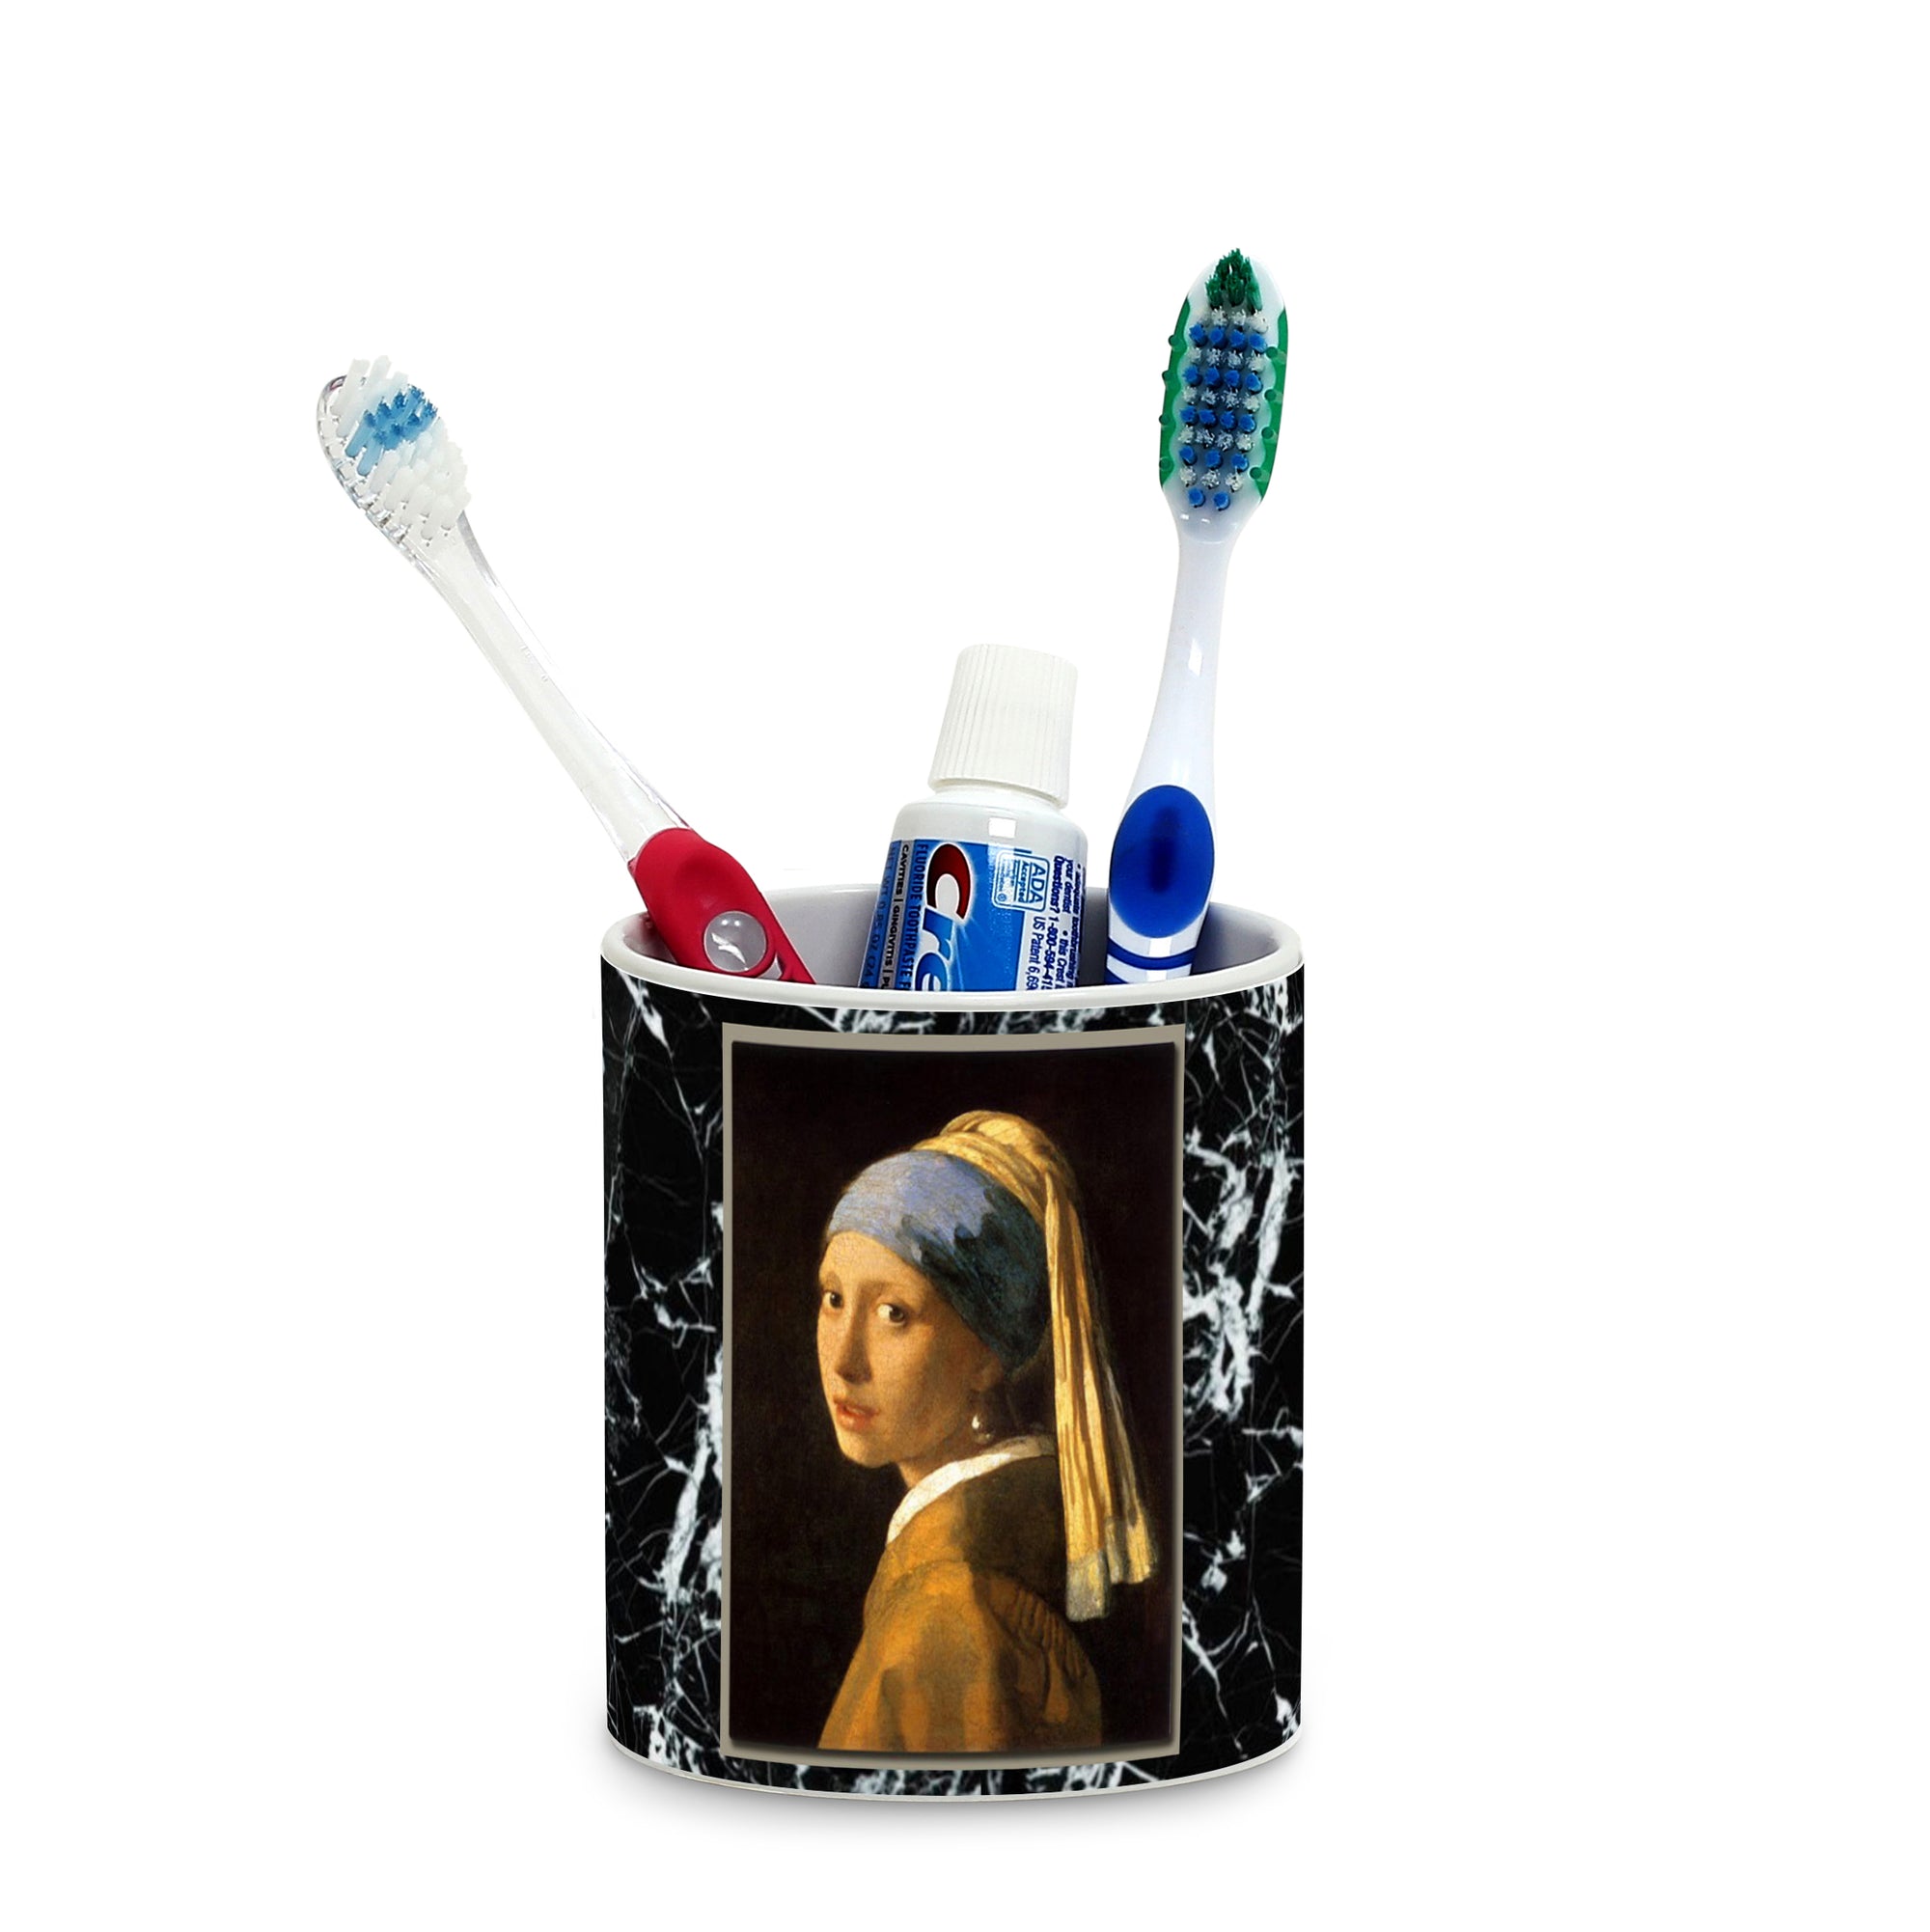 SUBLIMART: Affresco - Multi Use Tumbler - Opera "Girl with a Pearl Earring" by Johannes Vermeer. (Design #AFF08) - Artistica.com